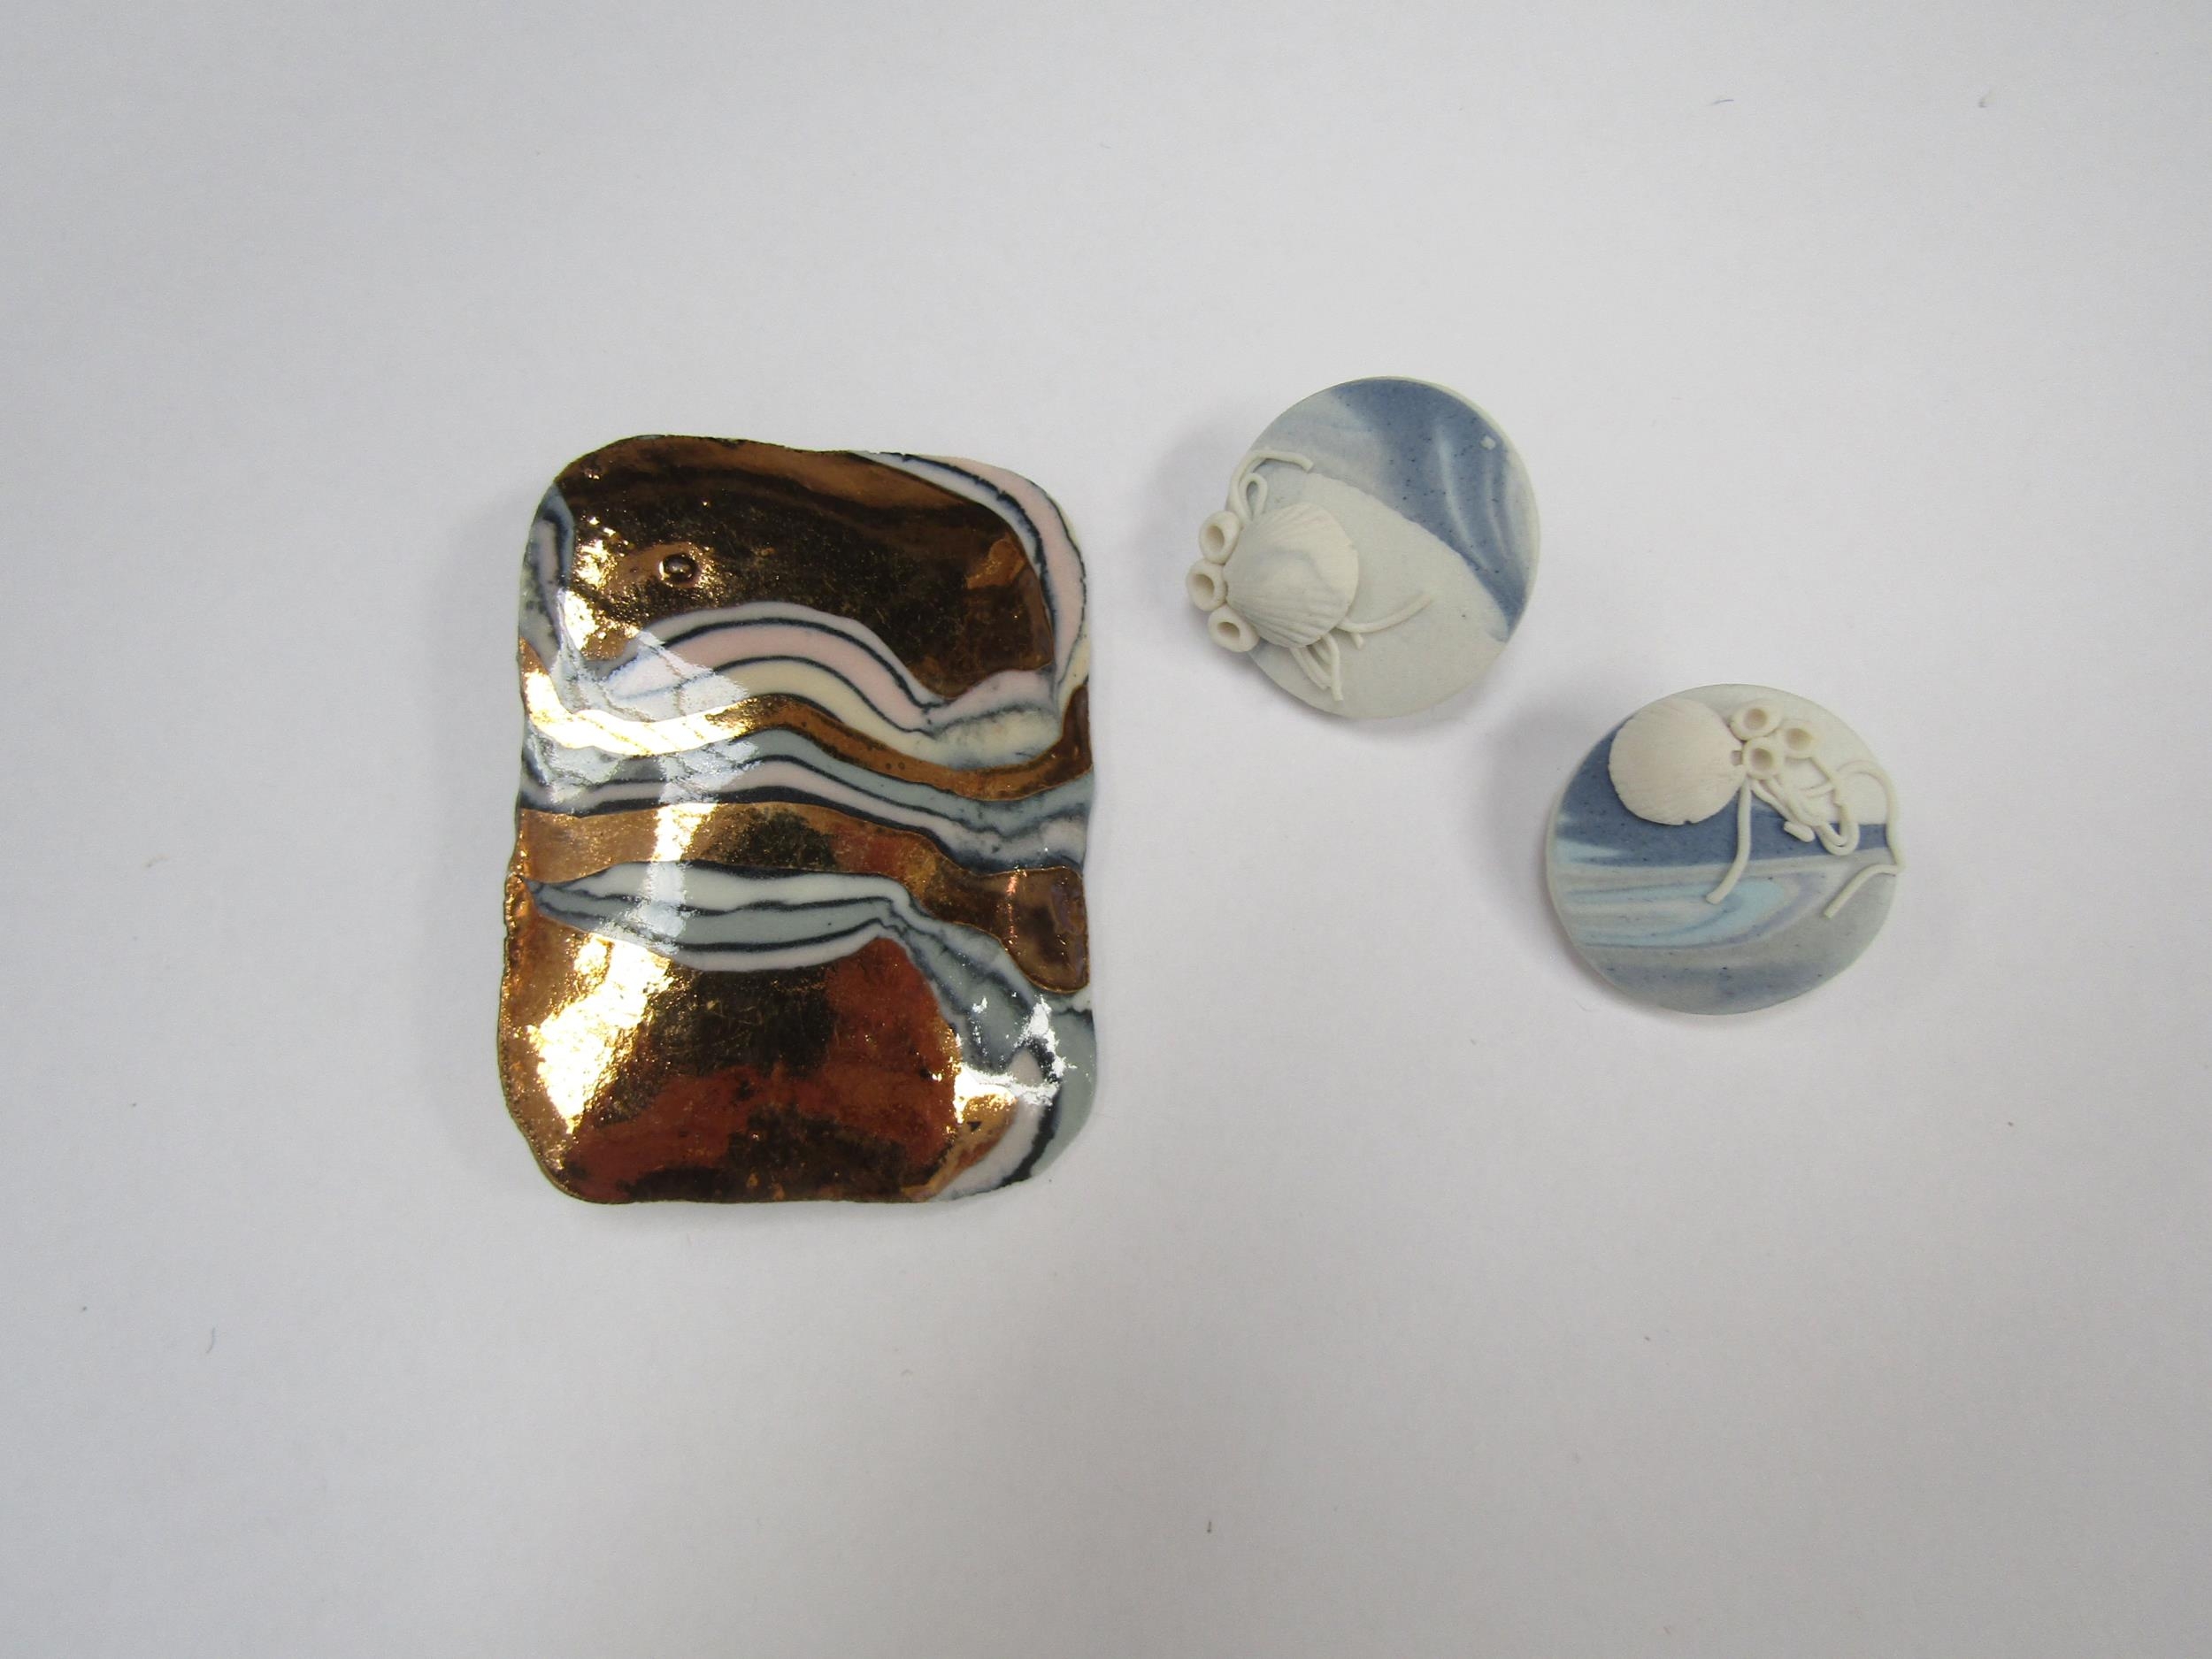 Shape Scape ceramic earrings by Elaine Dick MA, along with a large porcelain gold luster brooch